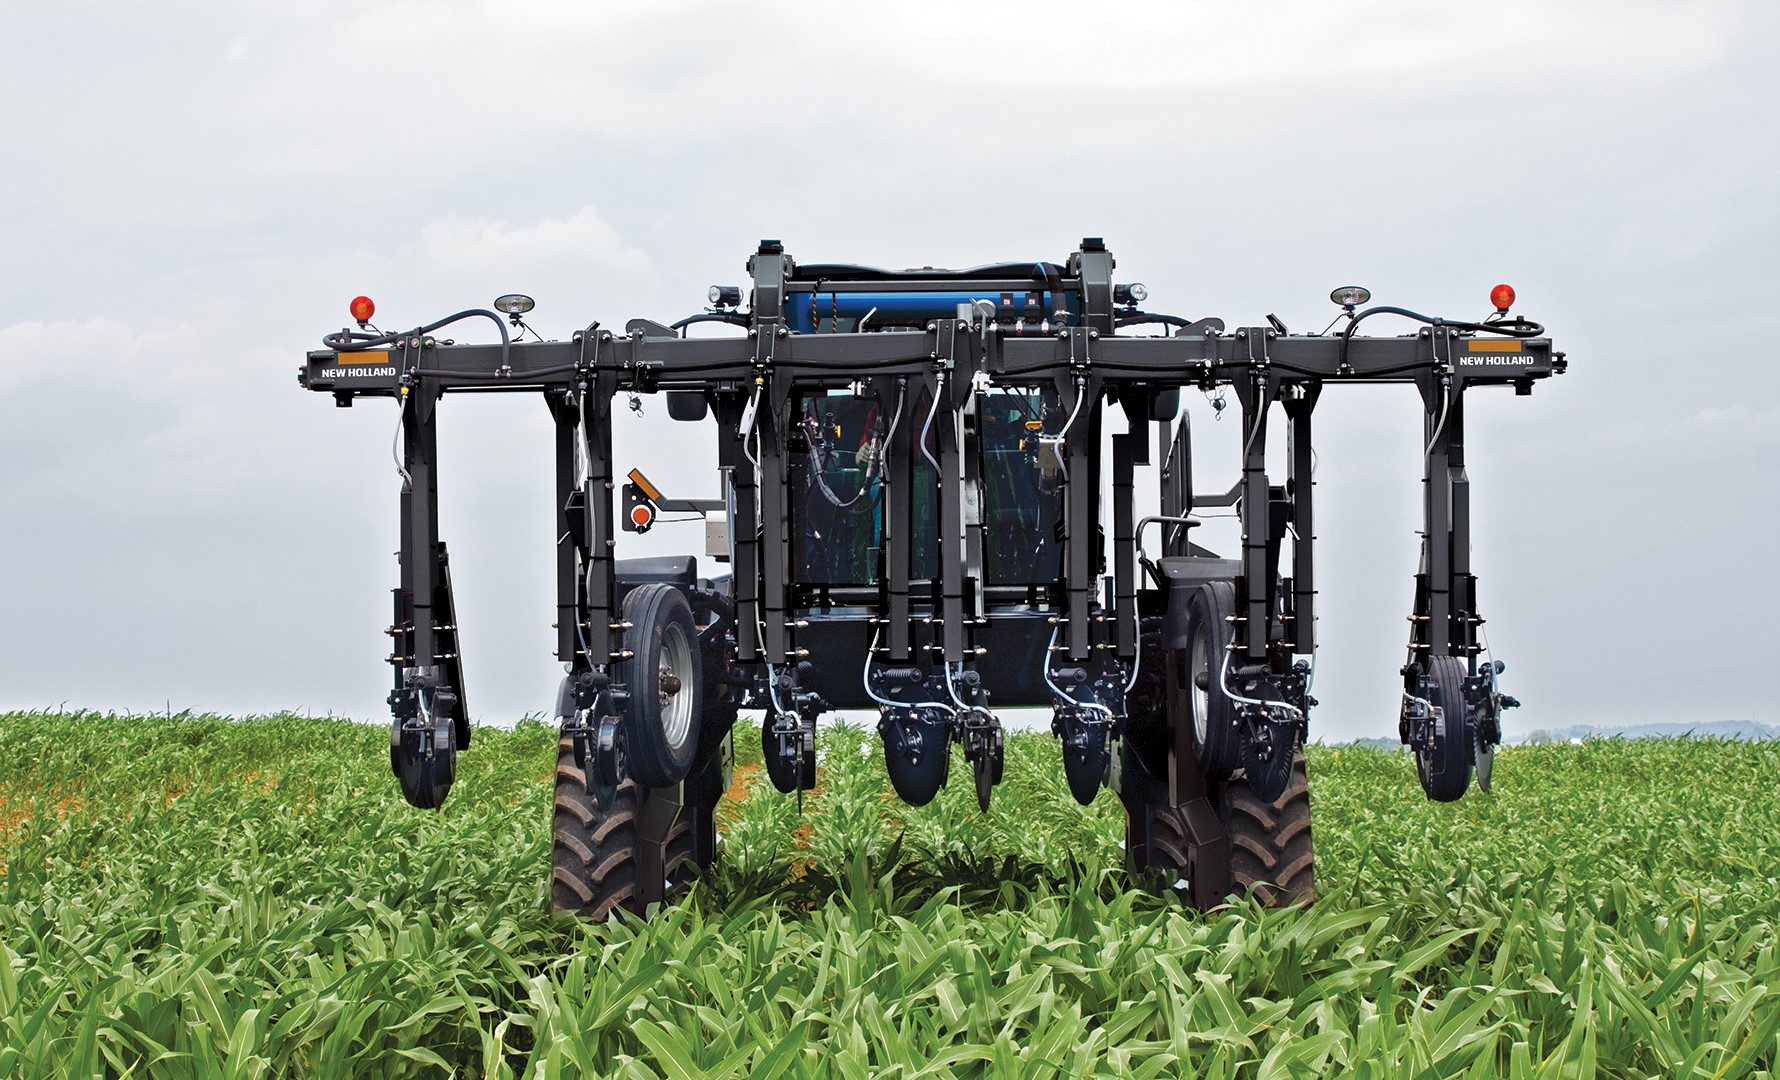 New Holland has introduced the Guardian™ Injection Toolbar to the Guardian self-propelled sprayer line